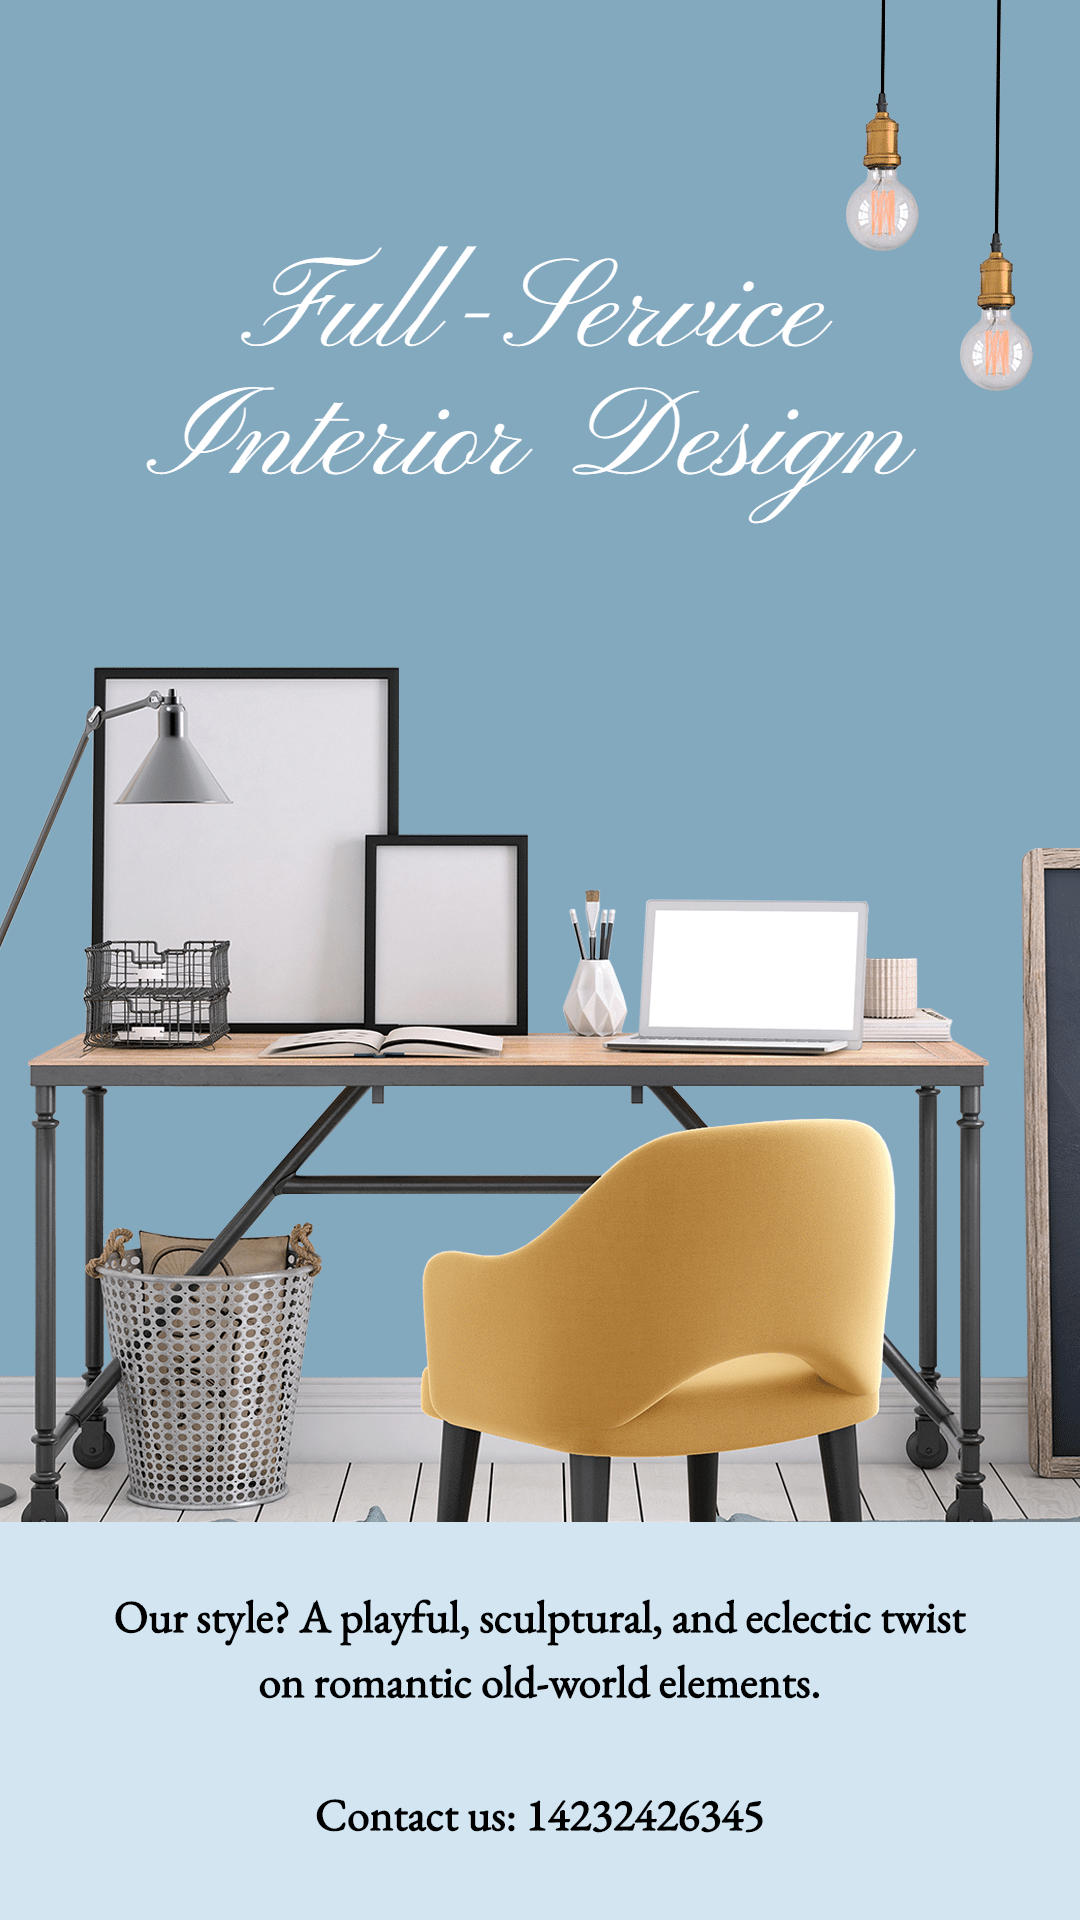 Literary Interior Design Services Introduction Ecommerce Story预览效果